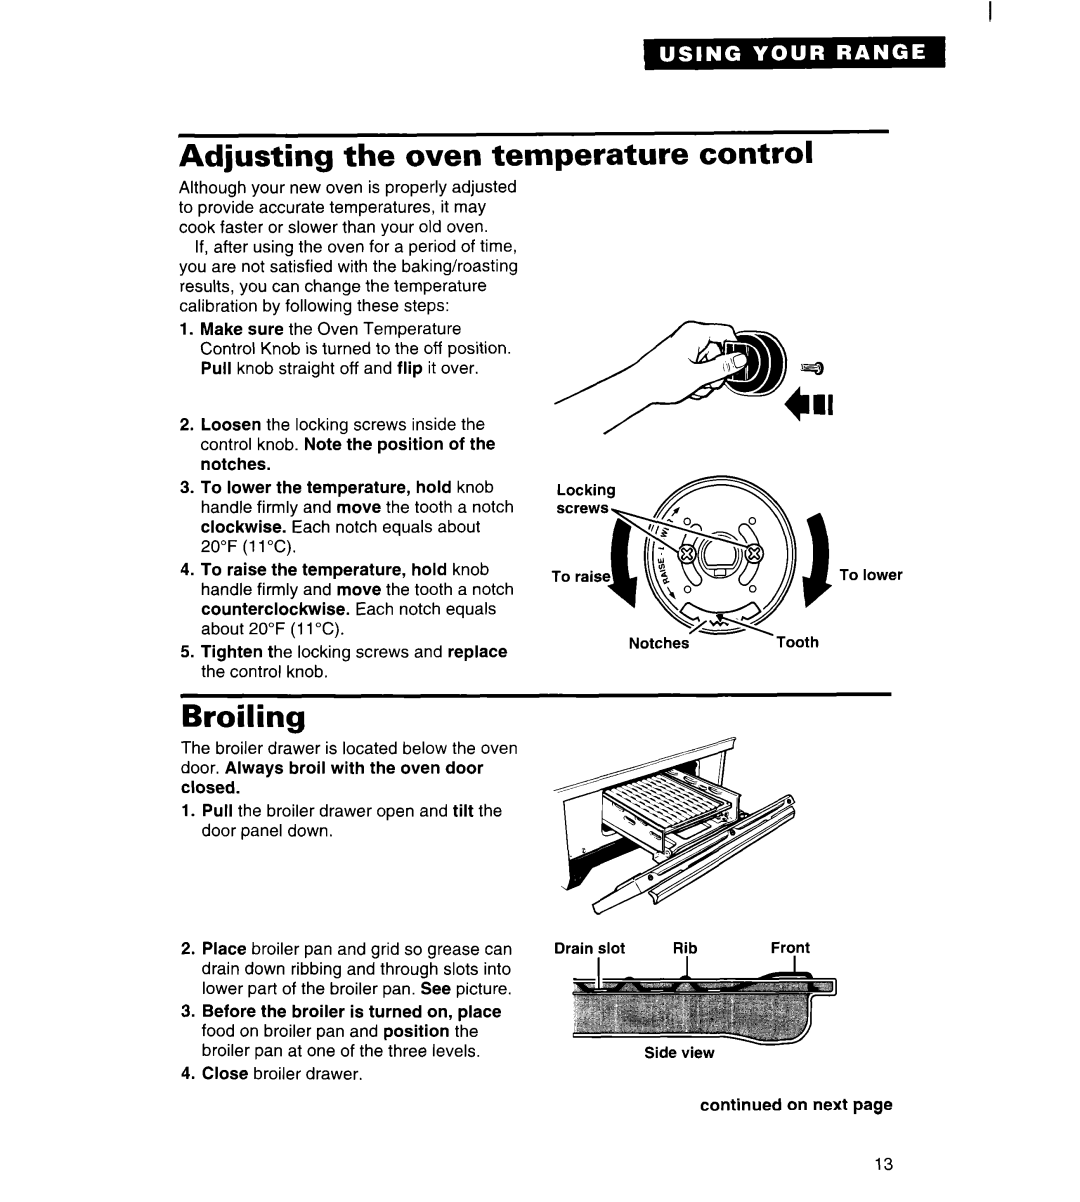 Estate TGRGIWZB manual Adjusting the oven temperature control, Broiling 